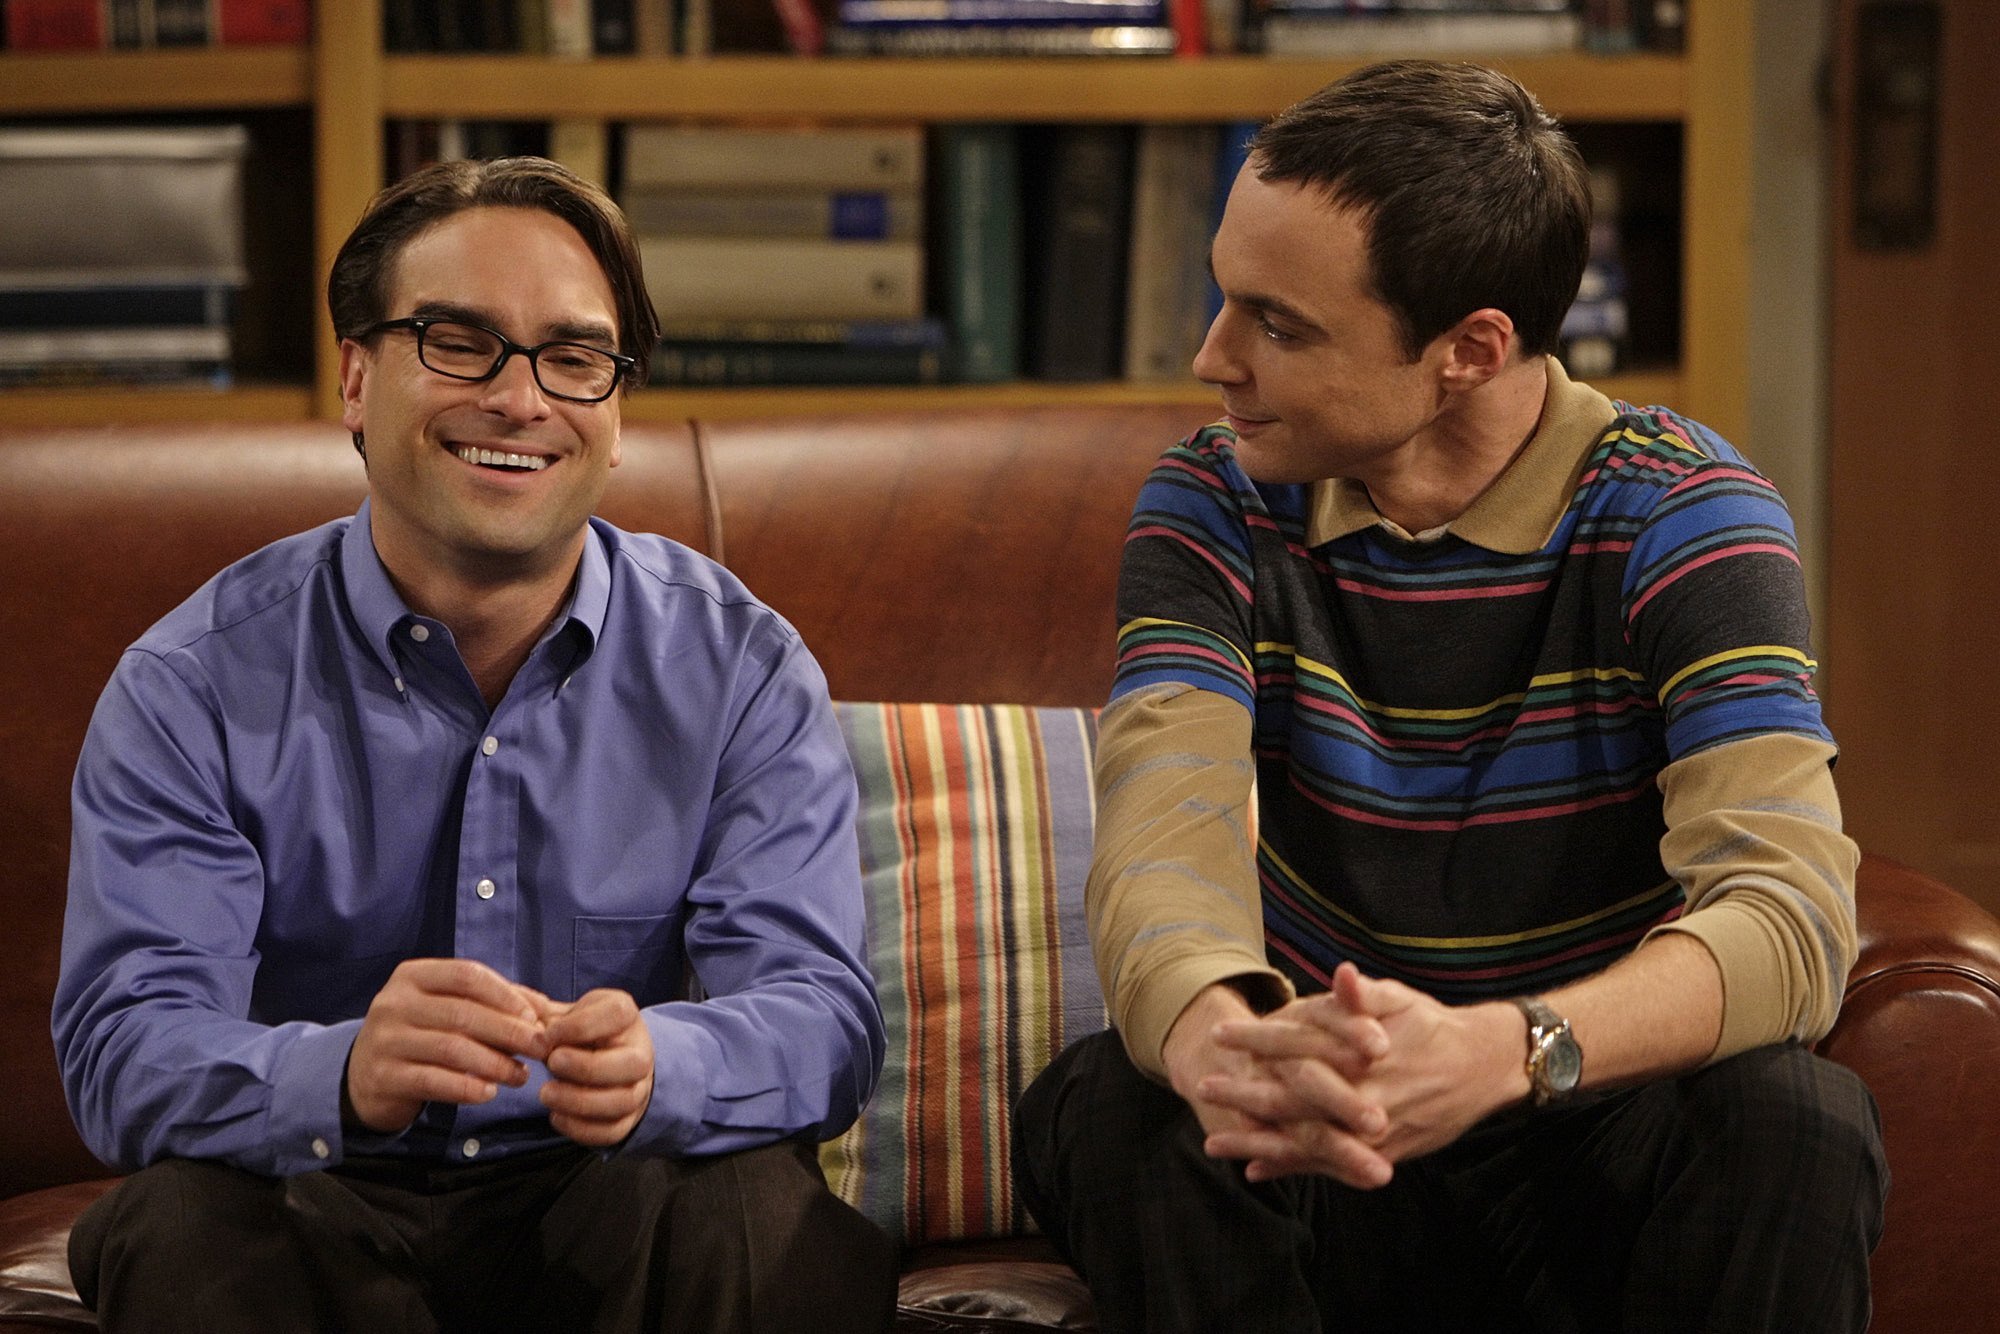 Leonard Hofstadter and Sheldon Cooper sit on the couch in their apartment in an episode of 'The Big Bang Theory'